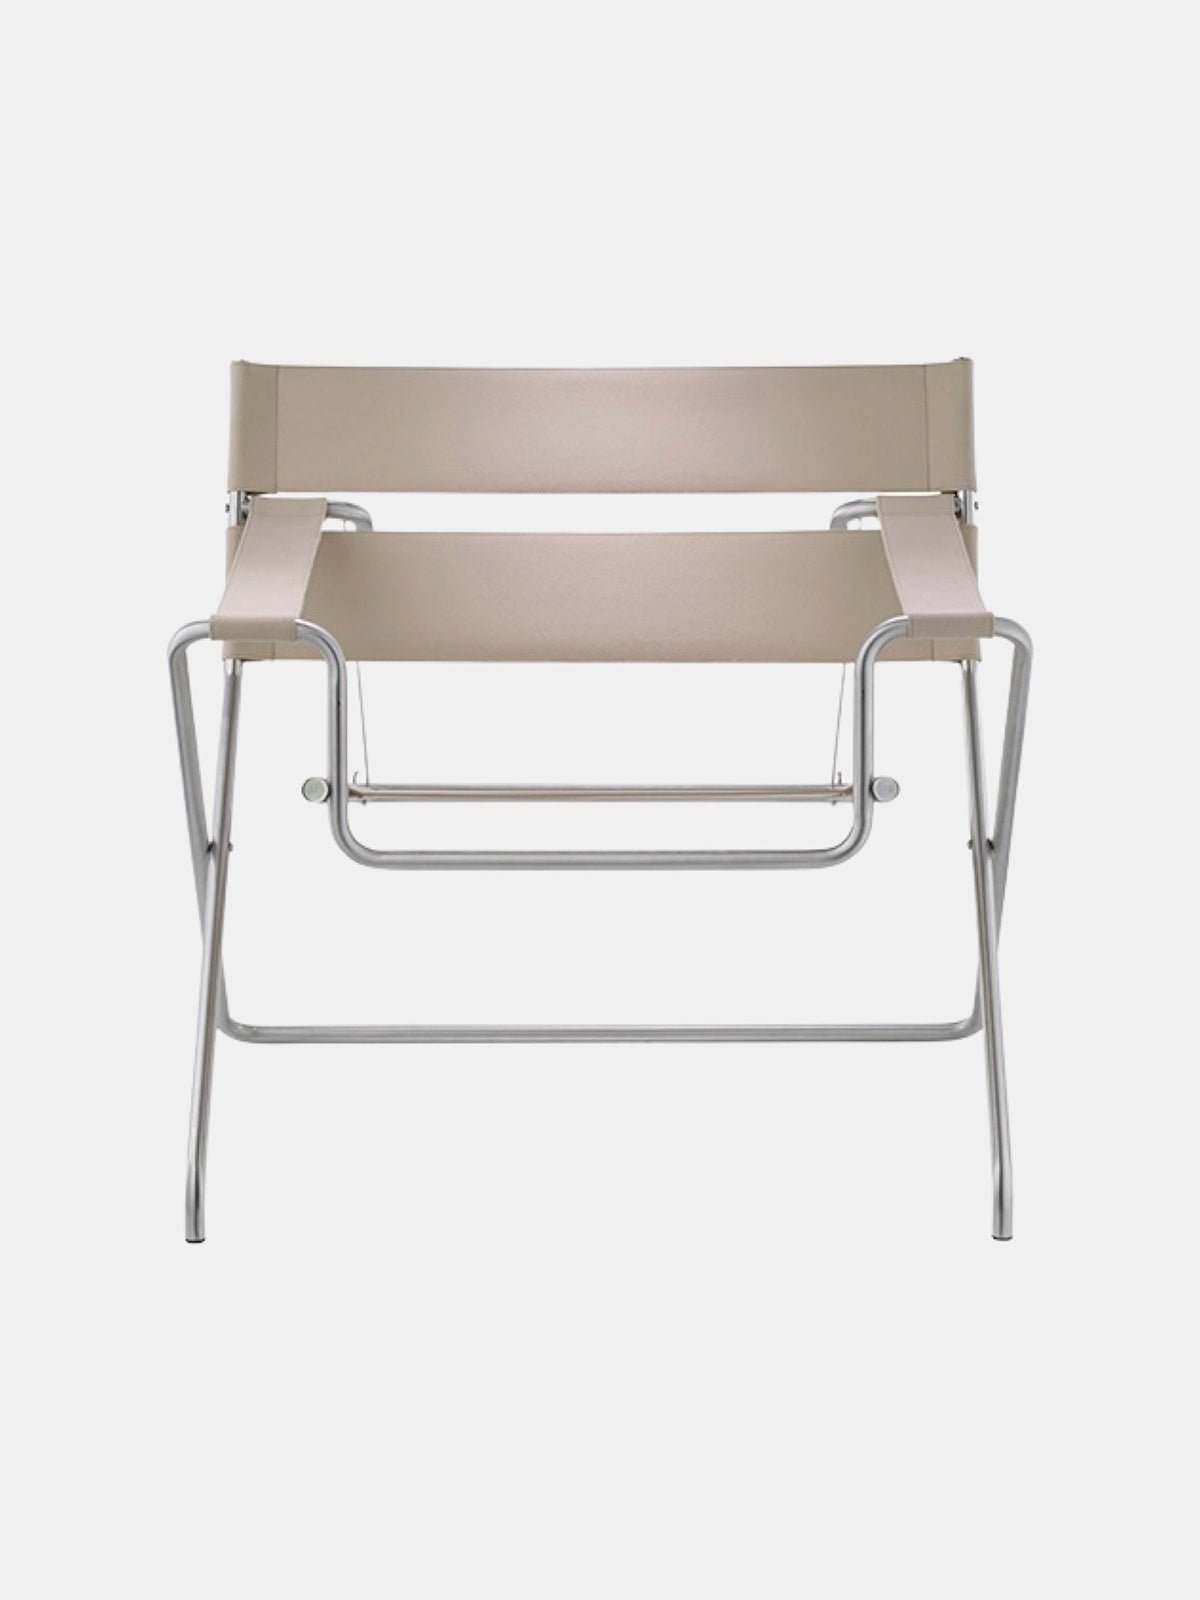 D4 Lounge Chair designed by Marcel Breuer